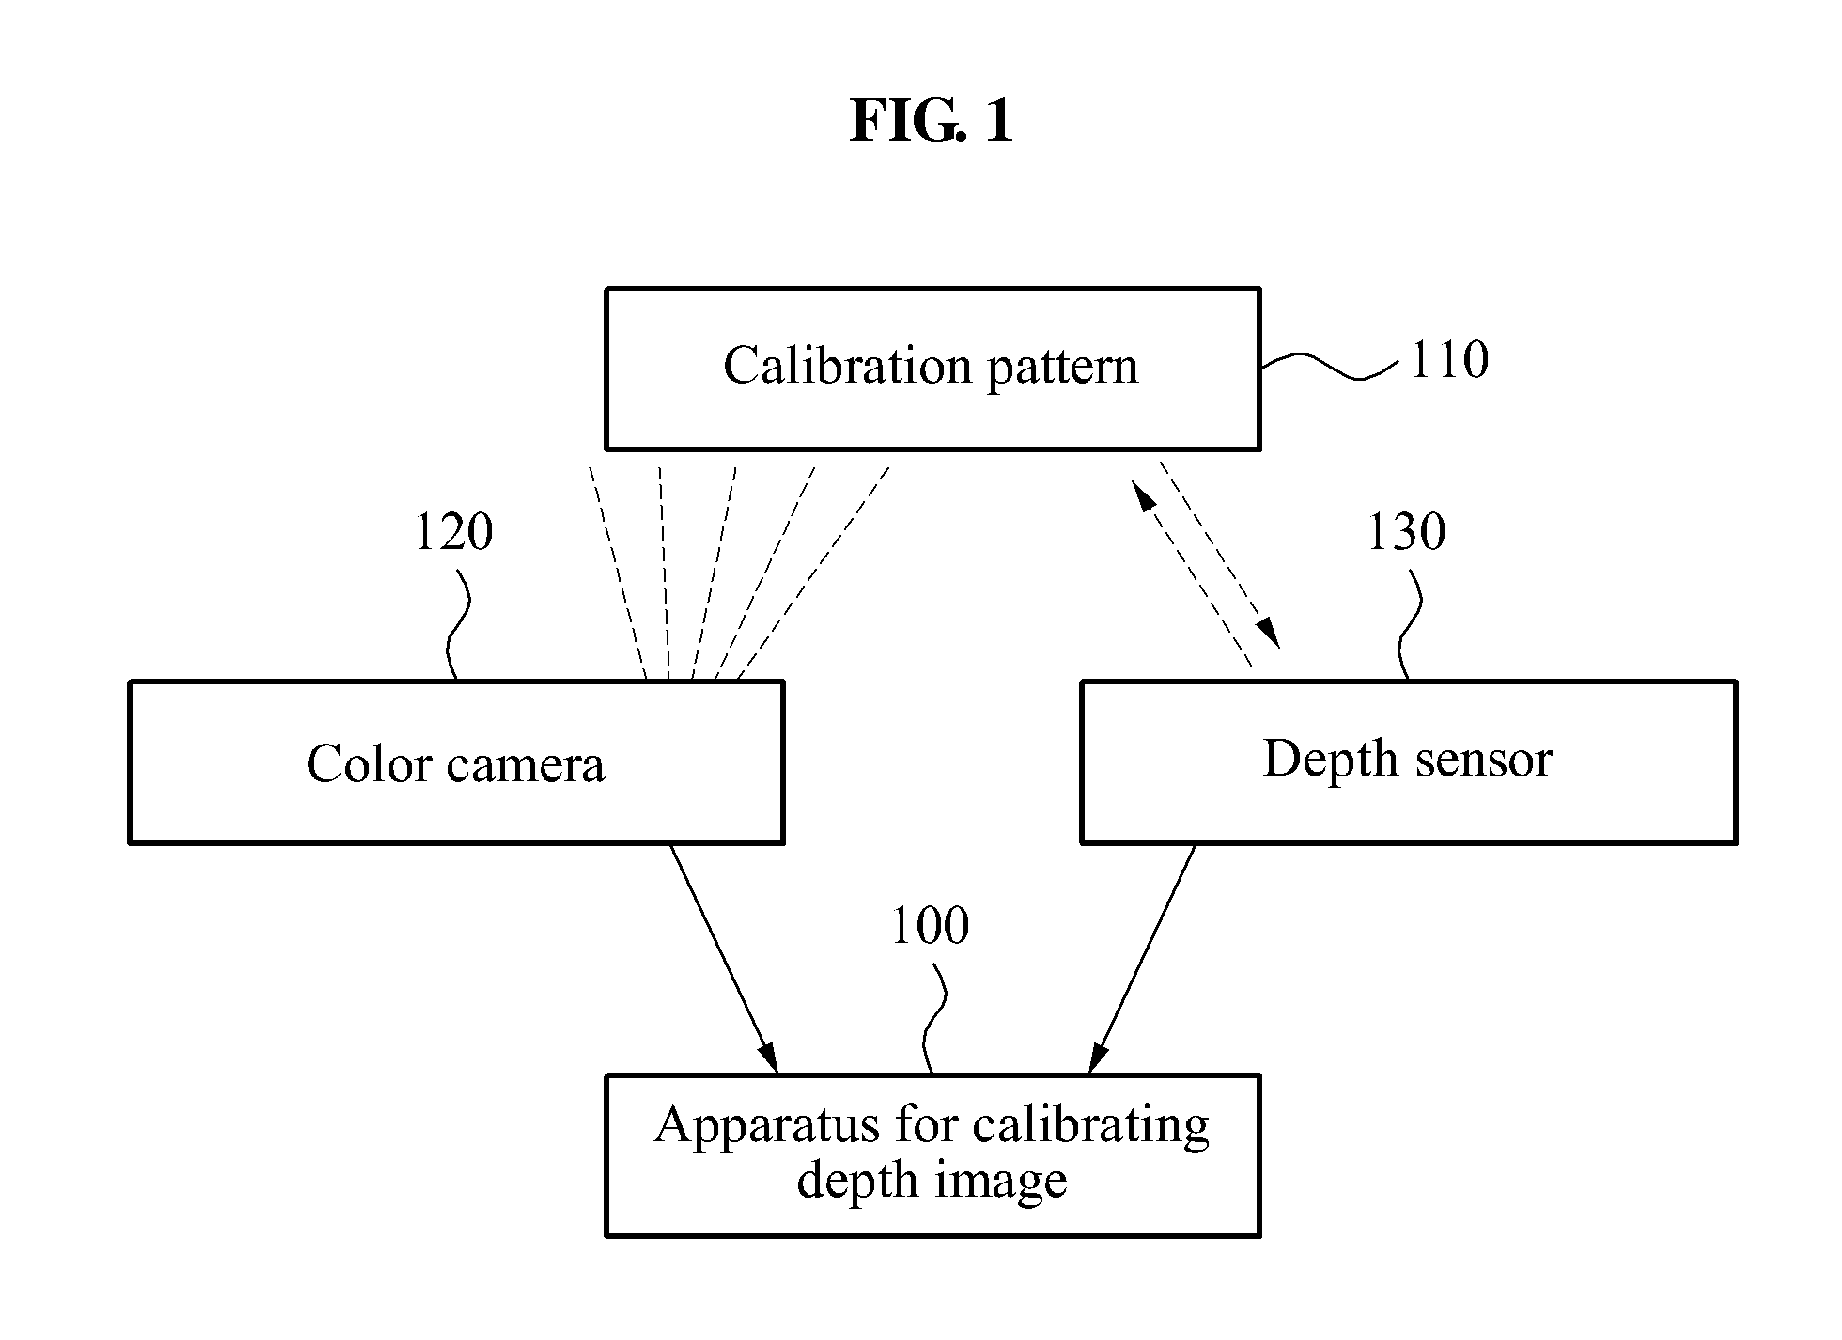 Apparatus and method for calibrating depth image based on relationship between depth sensor and color camera